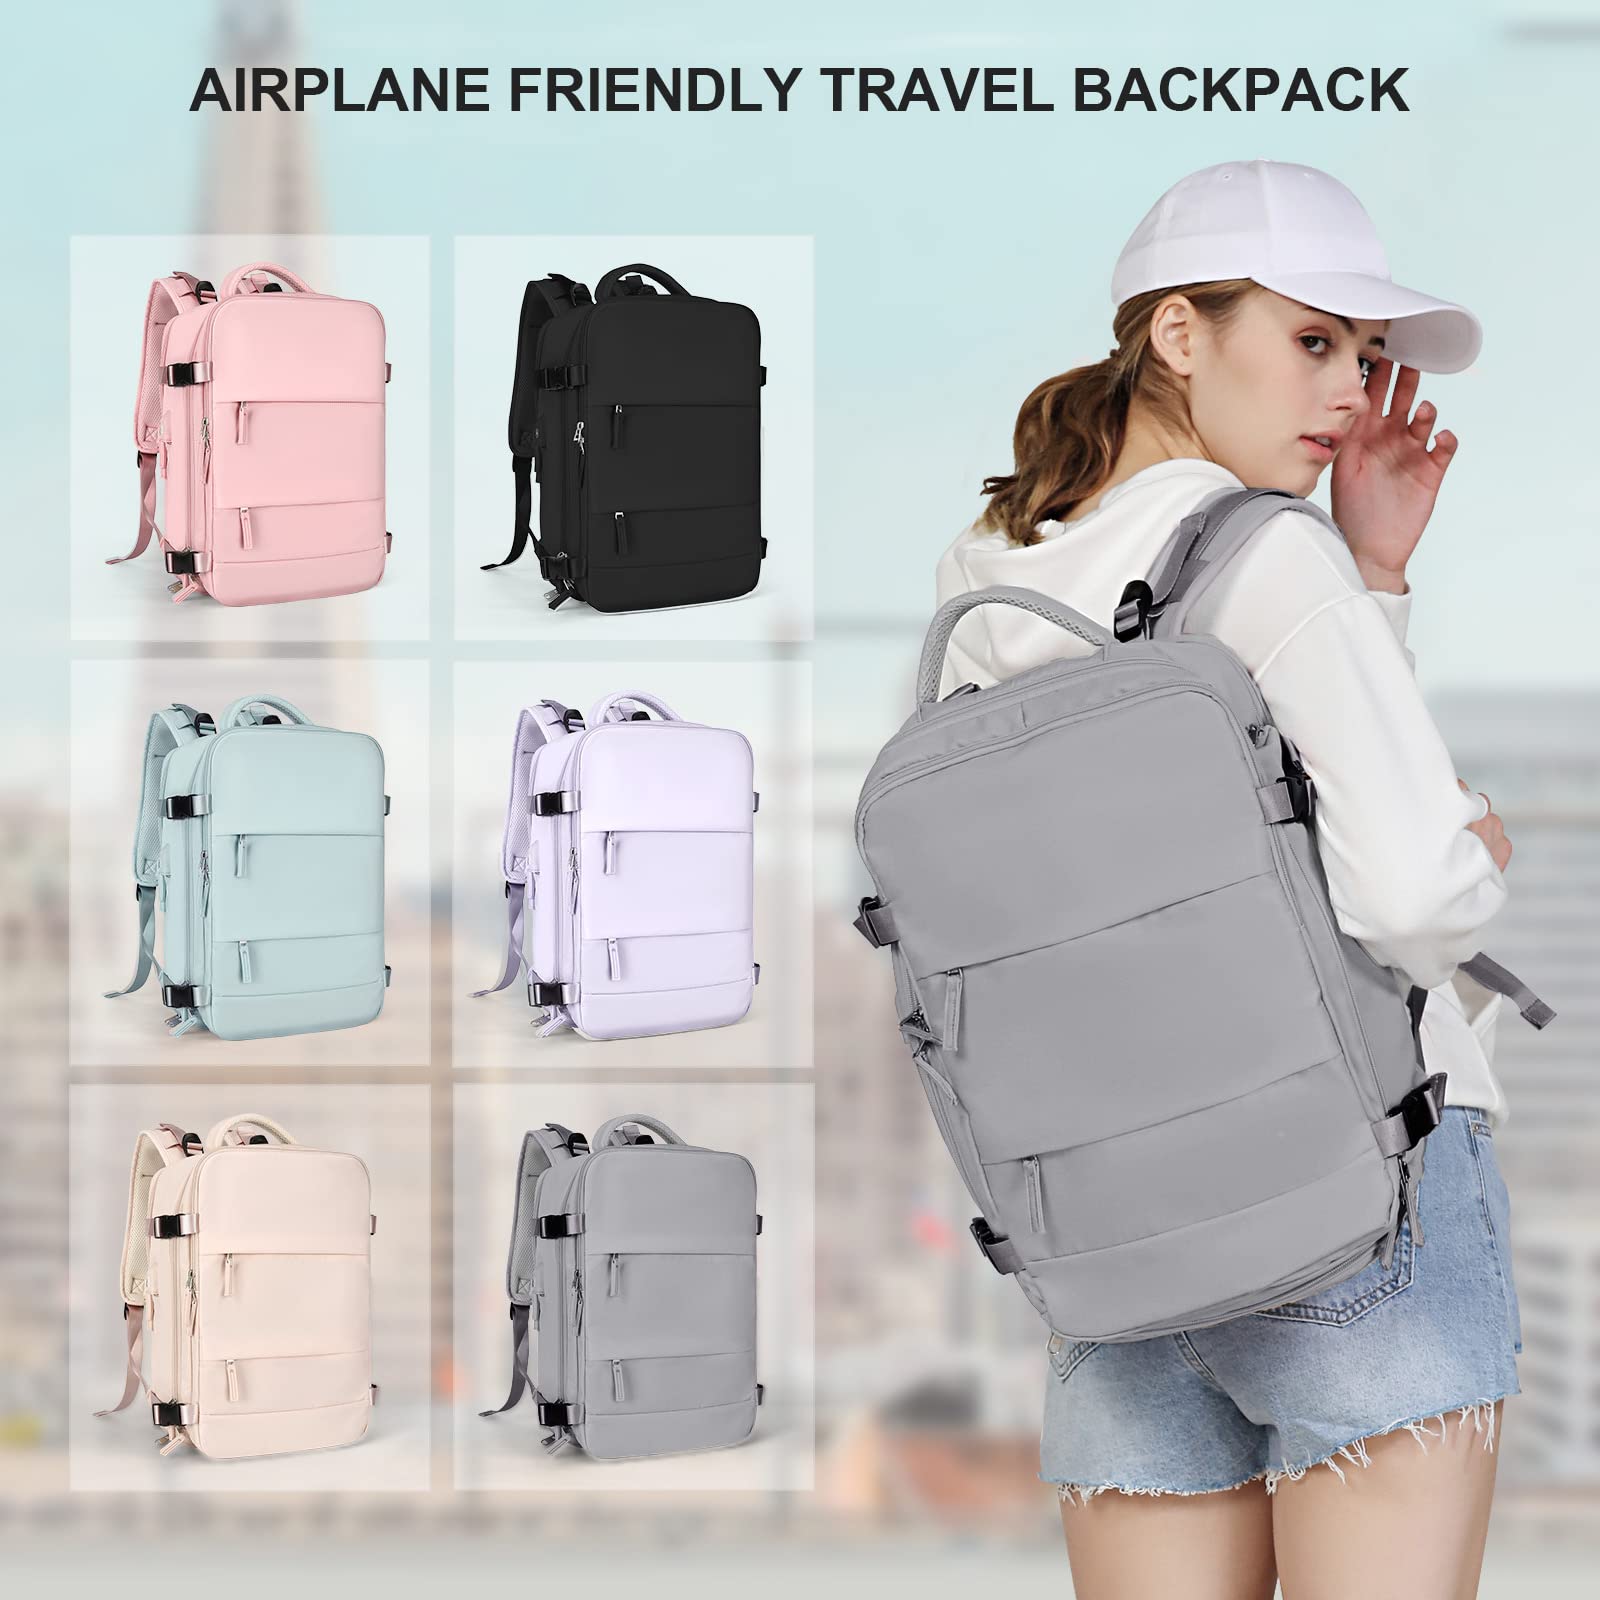 Large Travel Backpack Women, Carry On Backpack,Hiking Backpack Waterproof Outdoor Sports Rucksack Casual Daypack School Bag Fit 14 Inch Laptop with USB Charging Port Shoes Compartment color Grey